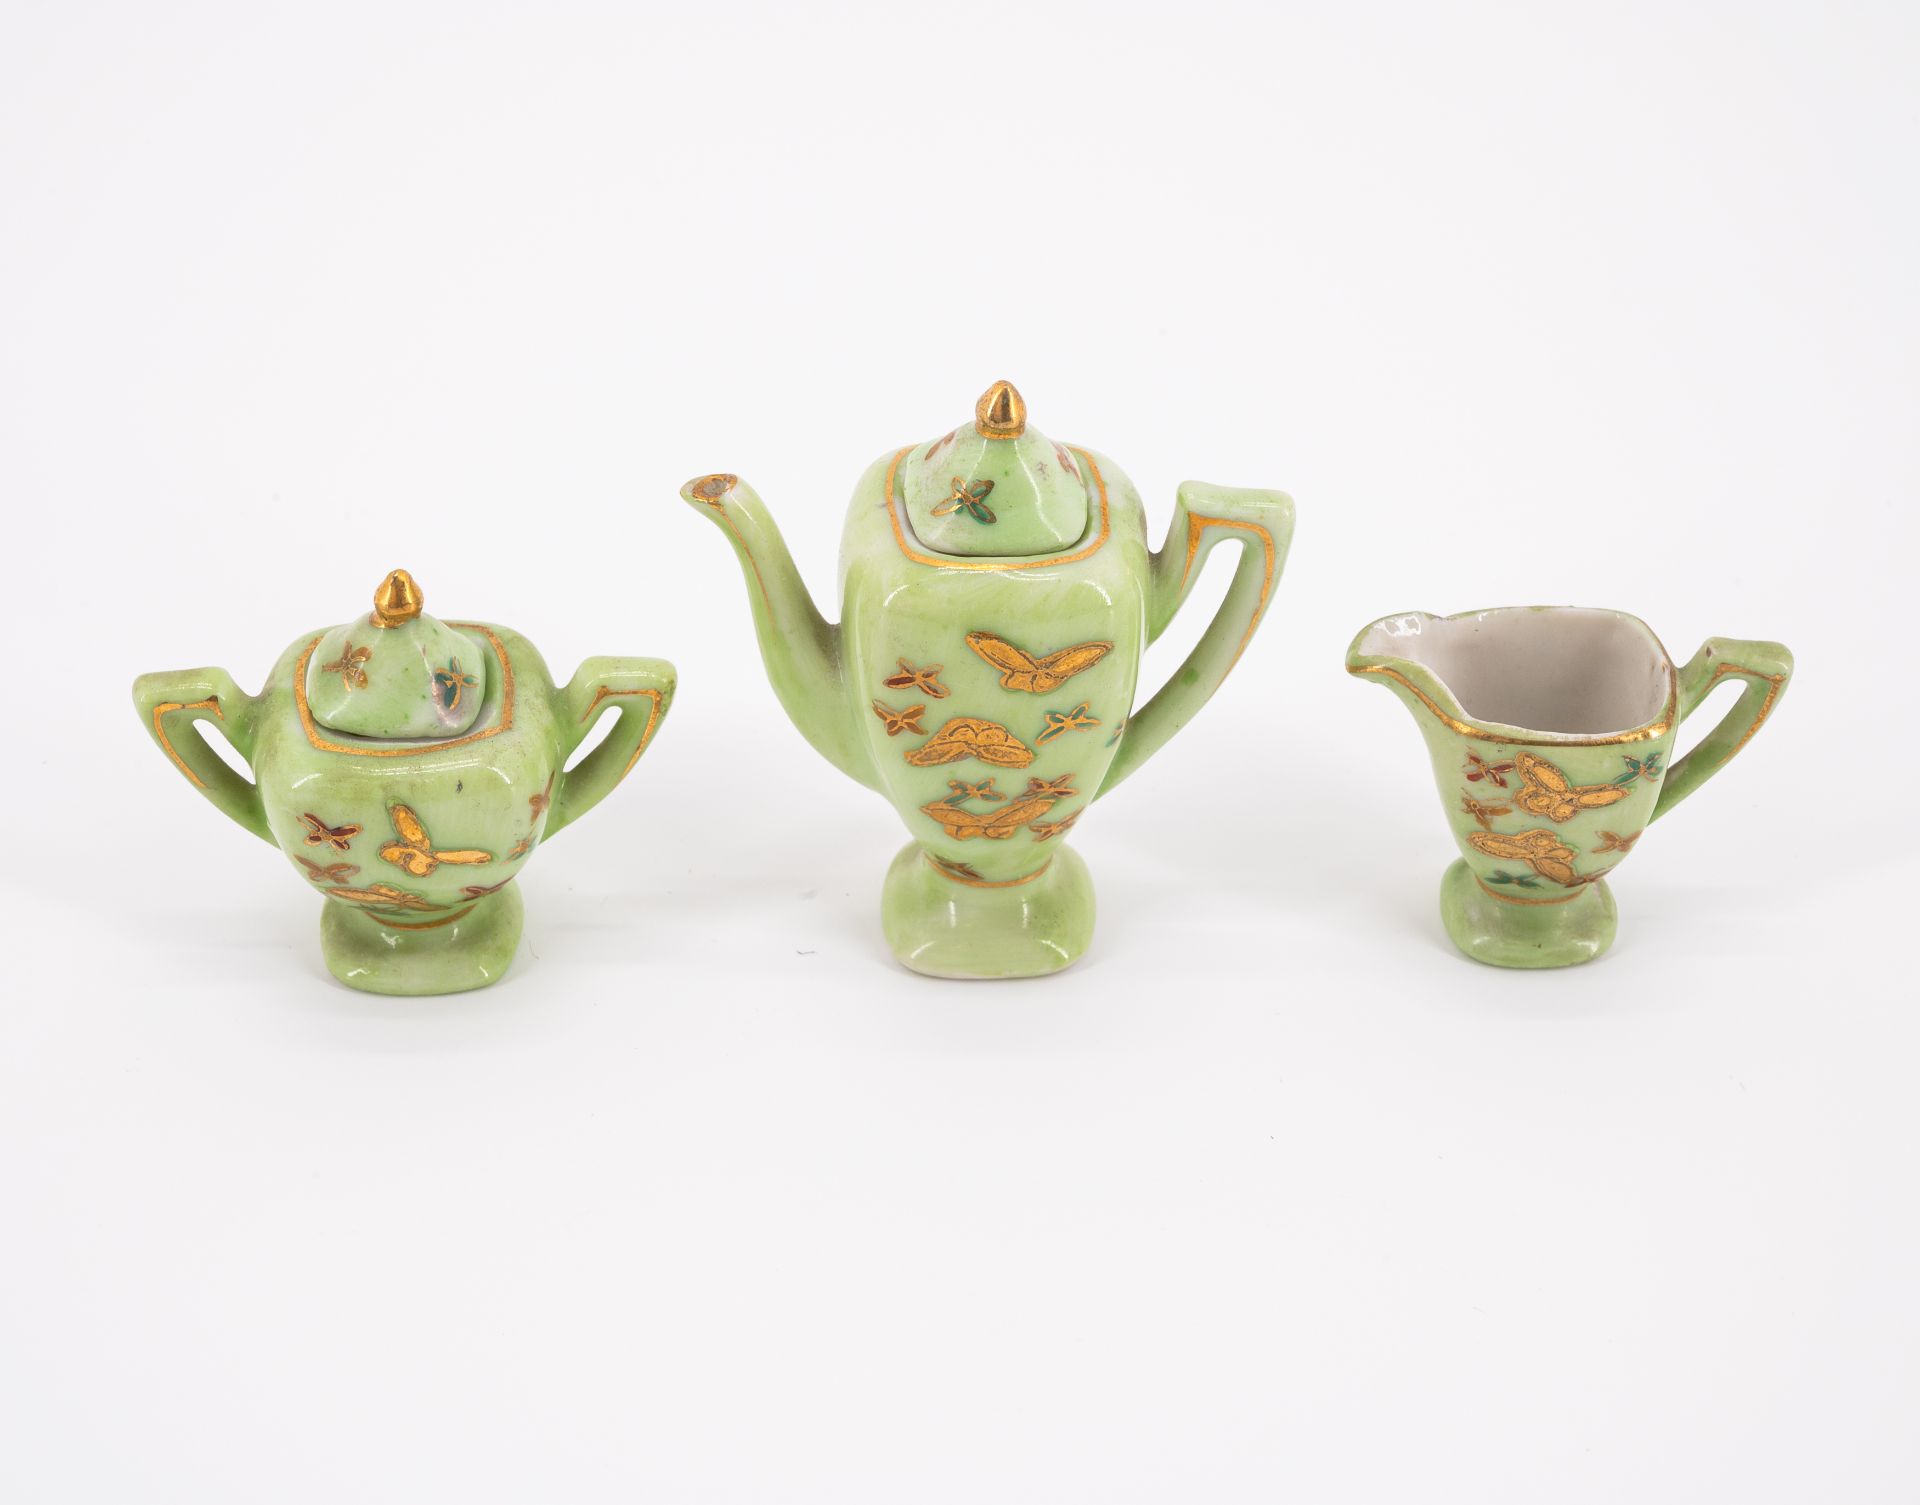 Germany: CERAMIC MINIATURE DINNER SERVICE AND PORCELAIN MINIATURE TEASERVICE - Image 12 of 16